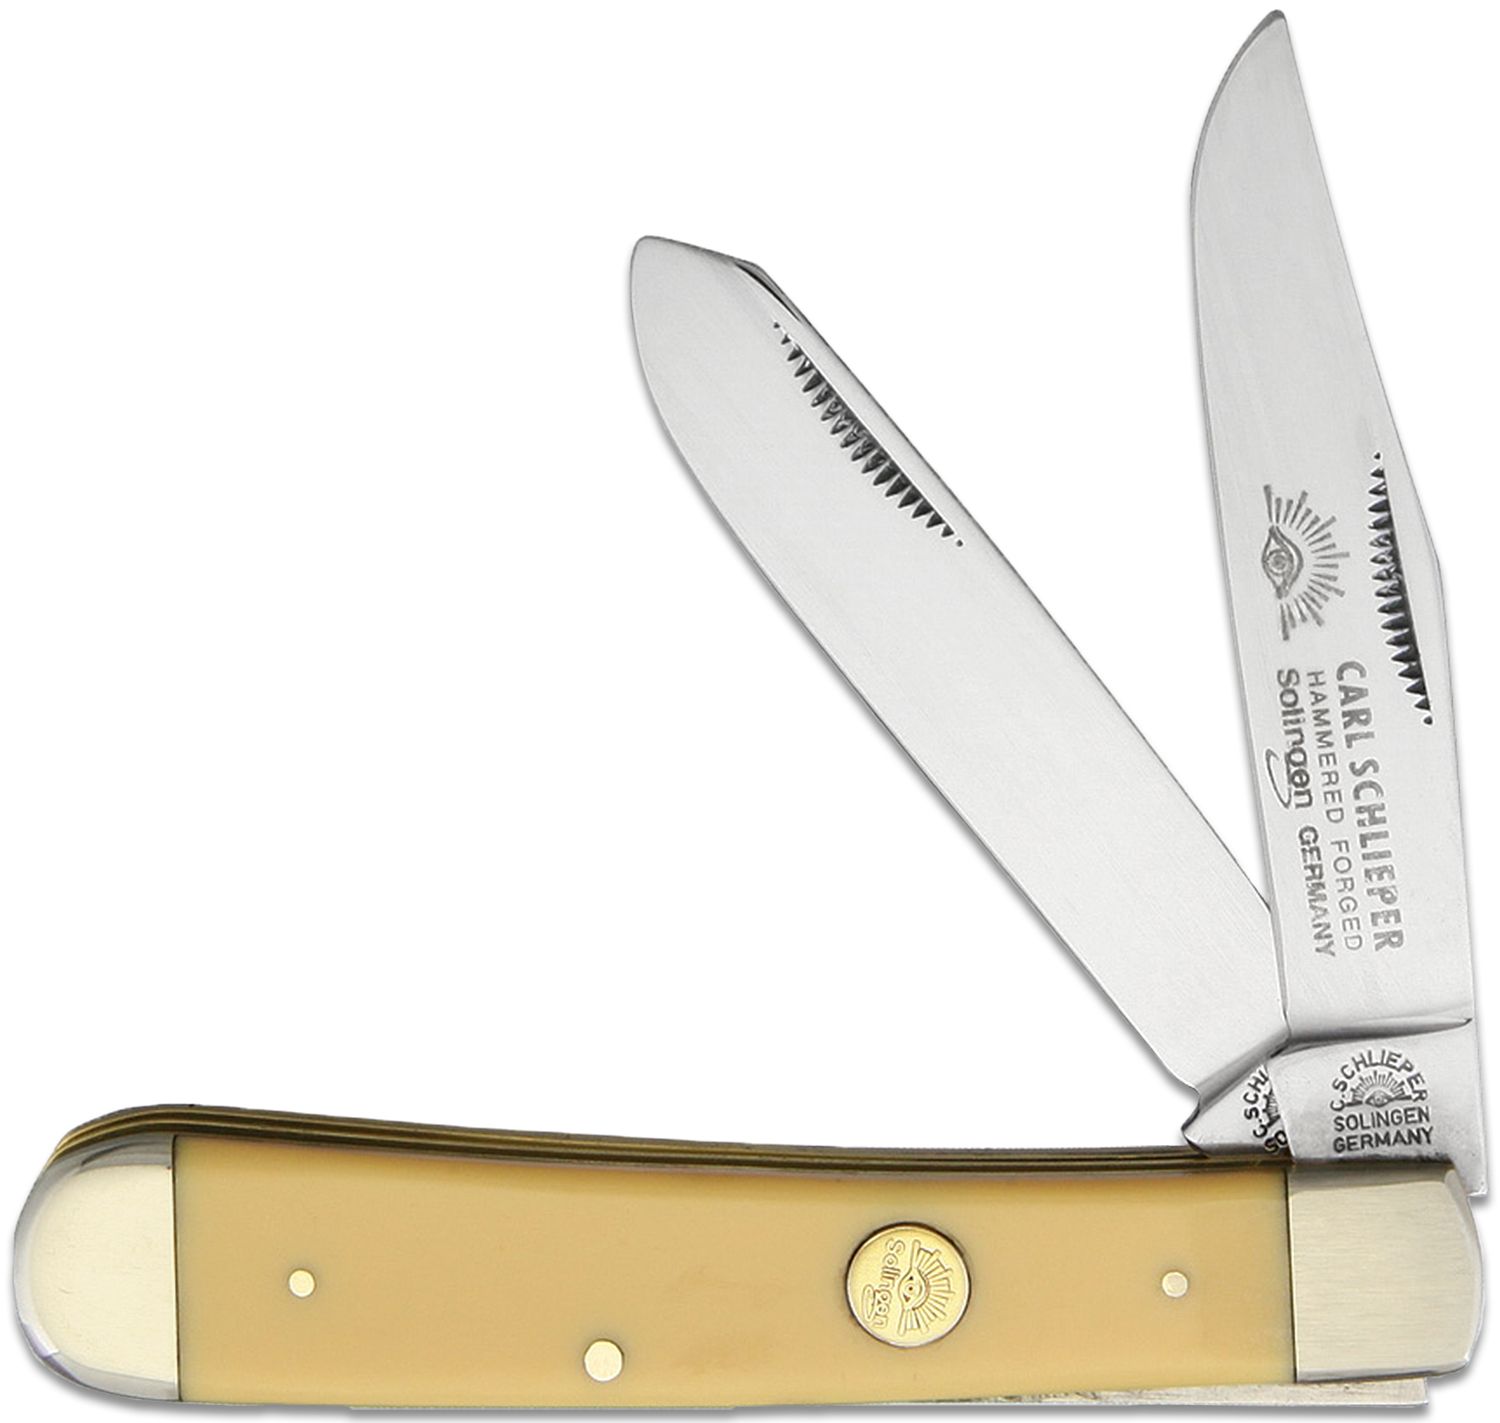 German Eye Brand Trapper 4 Closed, Yellow Celluloid Handles